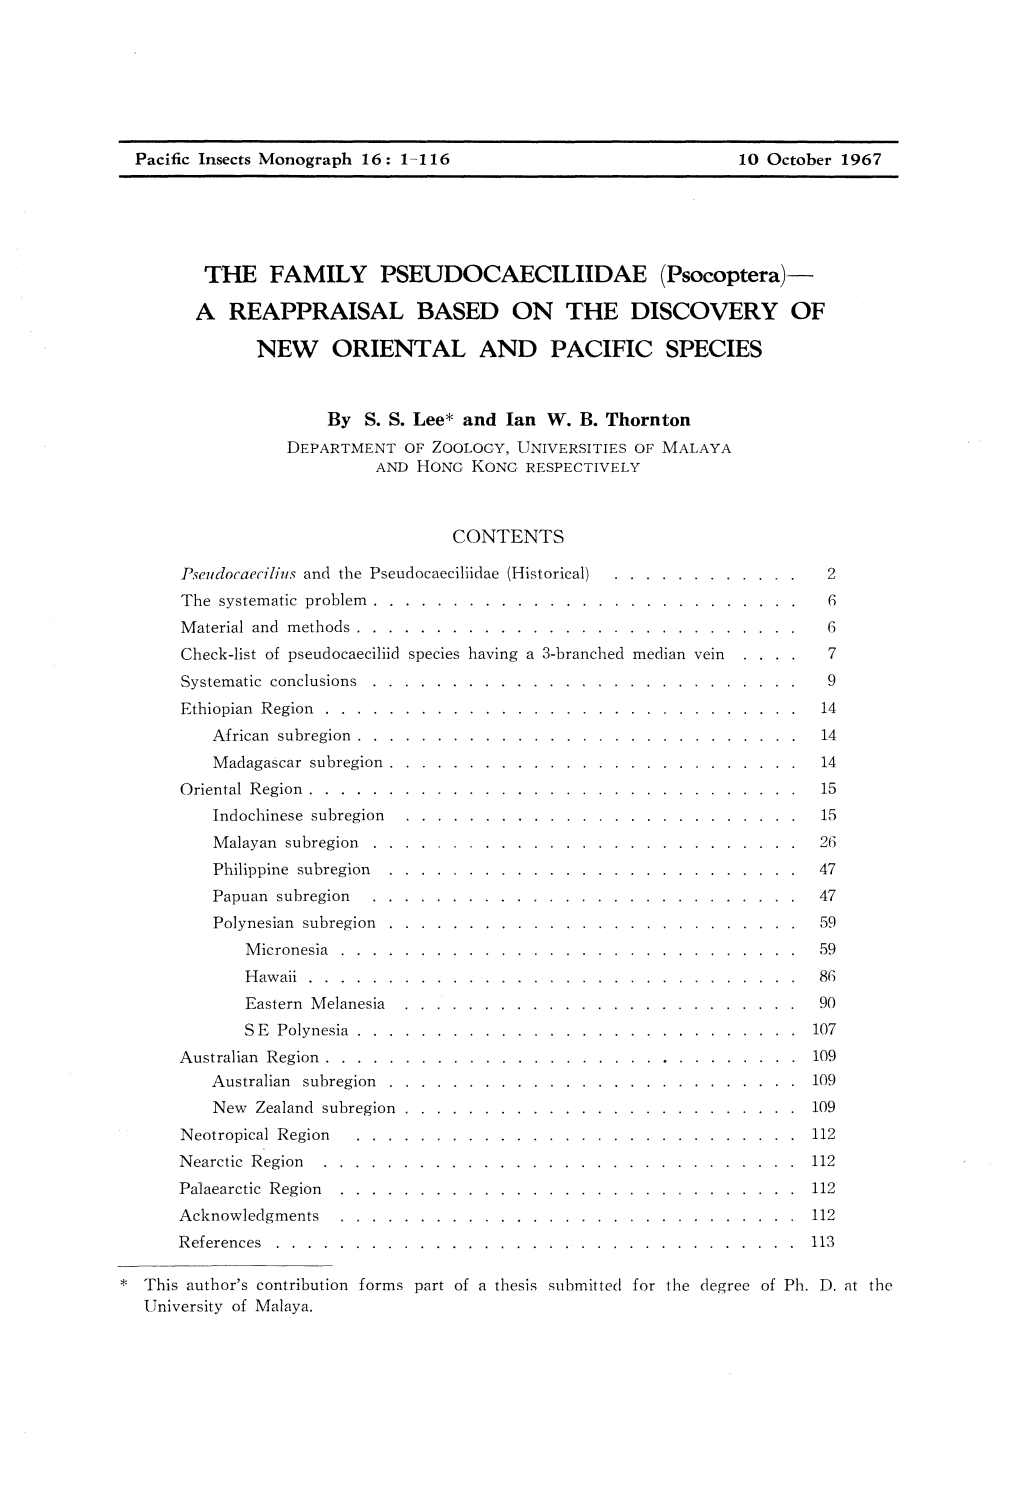 THE FAMILY PSEUDOCAECILIIDAE (Psocoptera)— a REAPPRAISAL BASED on the DISCOVERY of NEW ORIENTAL and PACIFIC SPECIES